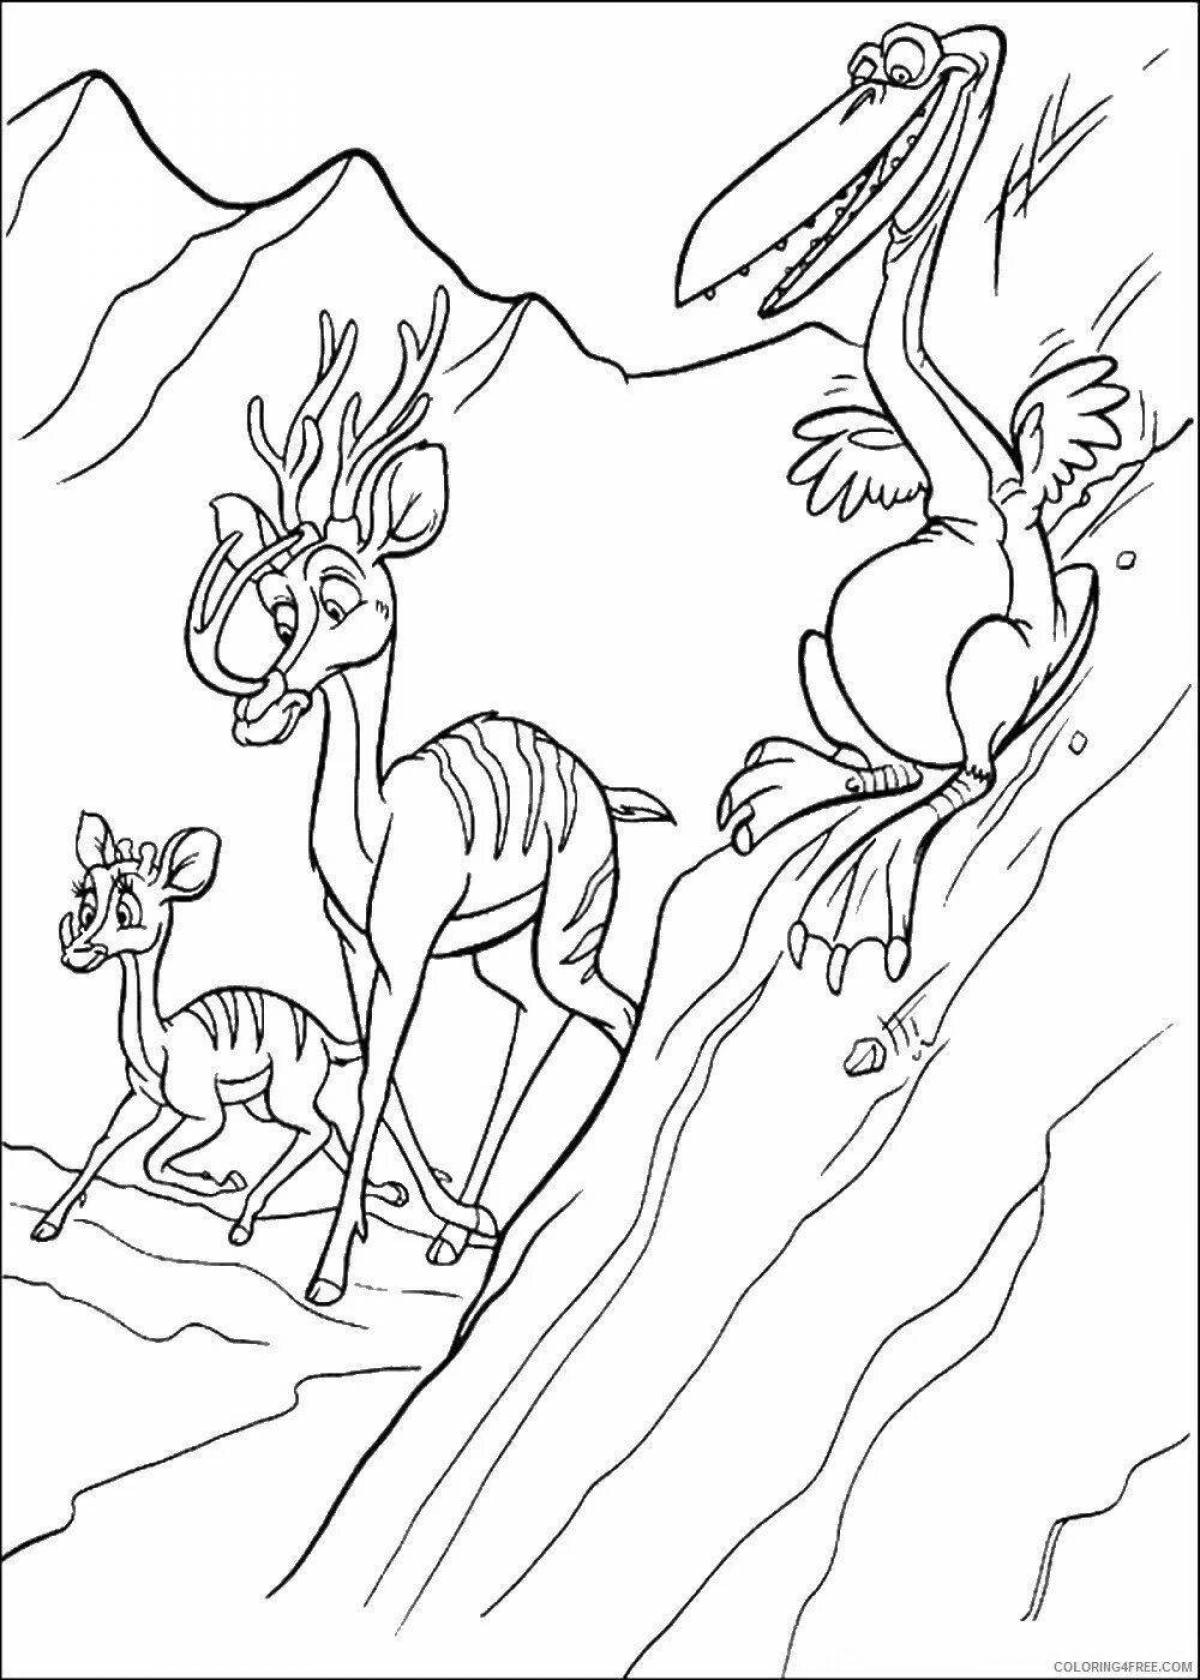 Coloring book incredible ice age 4